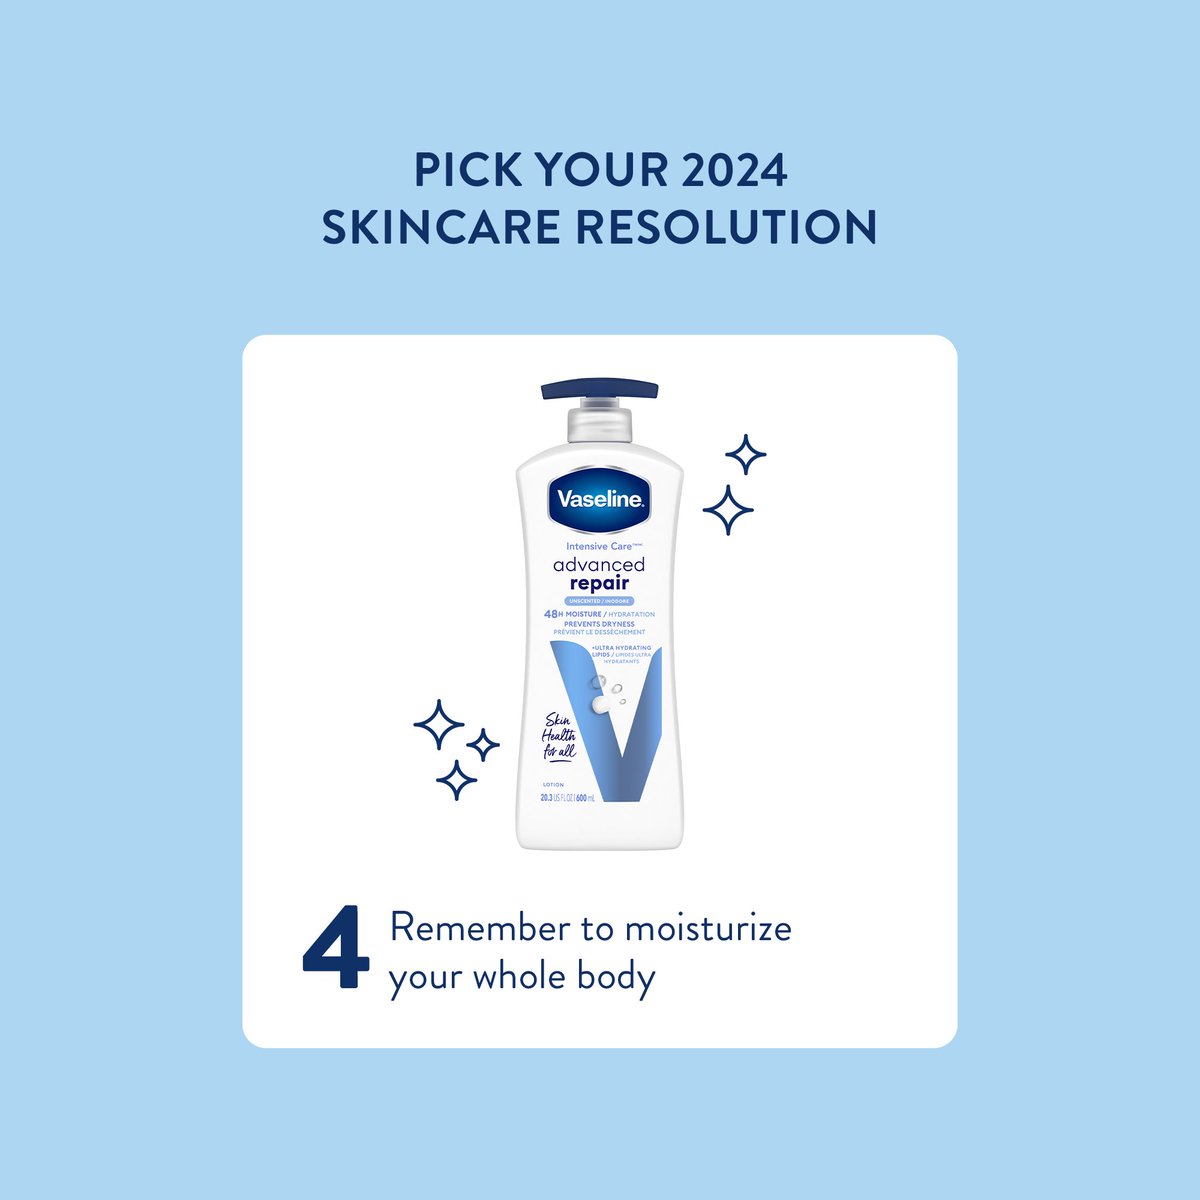 2024 is the year of your best 👏 skin 👏  ever 👏 ​ Swipe to choose the 2024 skincare resolution that will help you get there and share your pick in the comments below 👇 #Vaseline #SkincareProducts #SkincareMustHave #NewYearResolutions